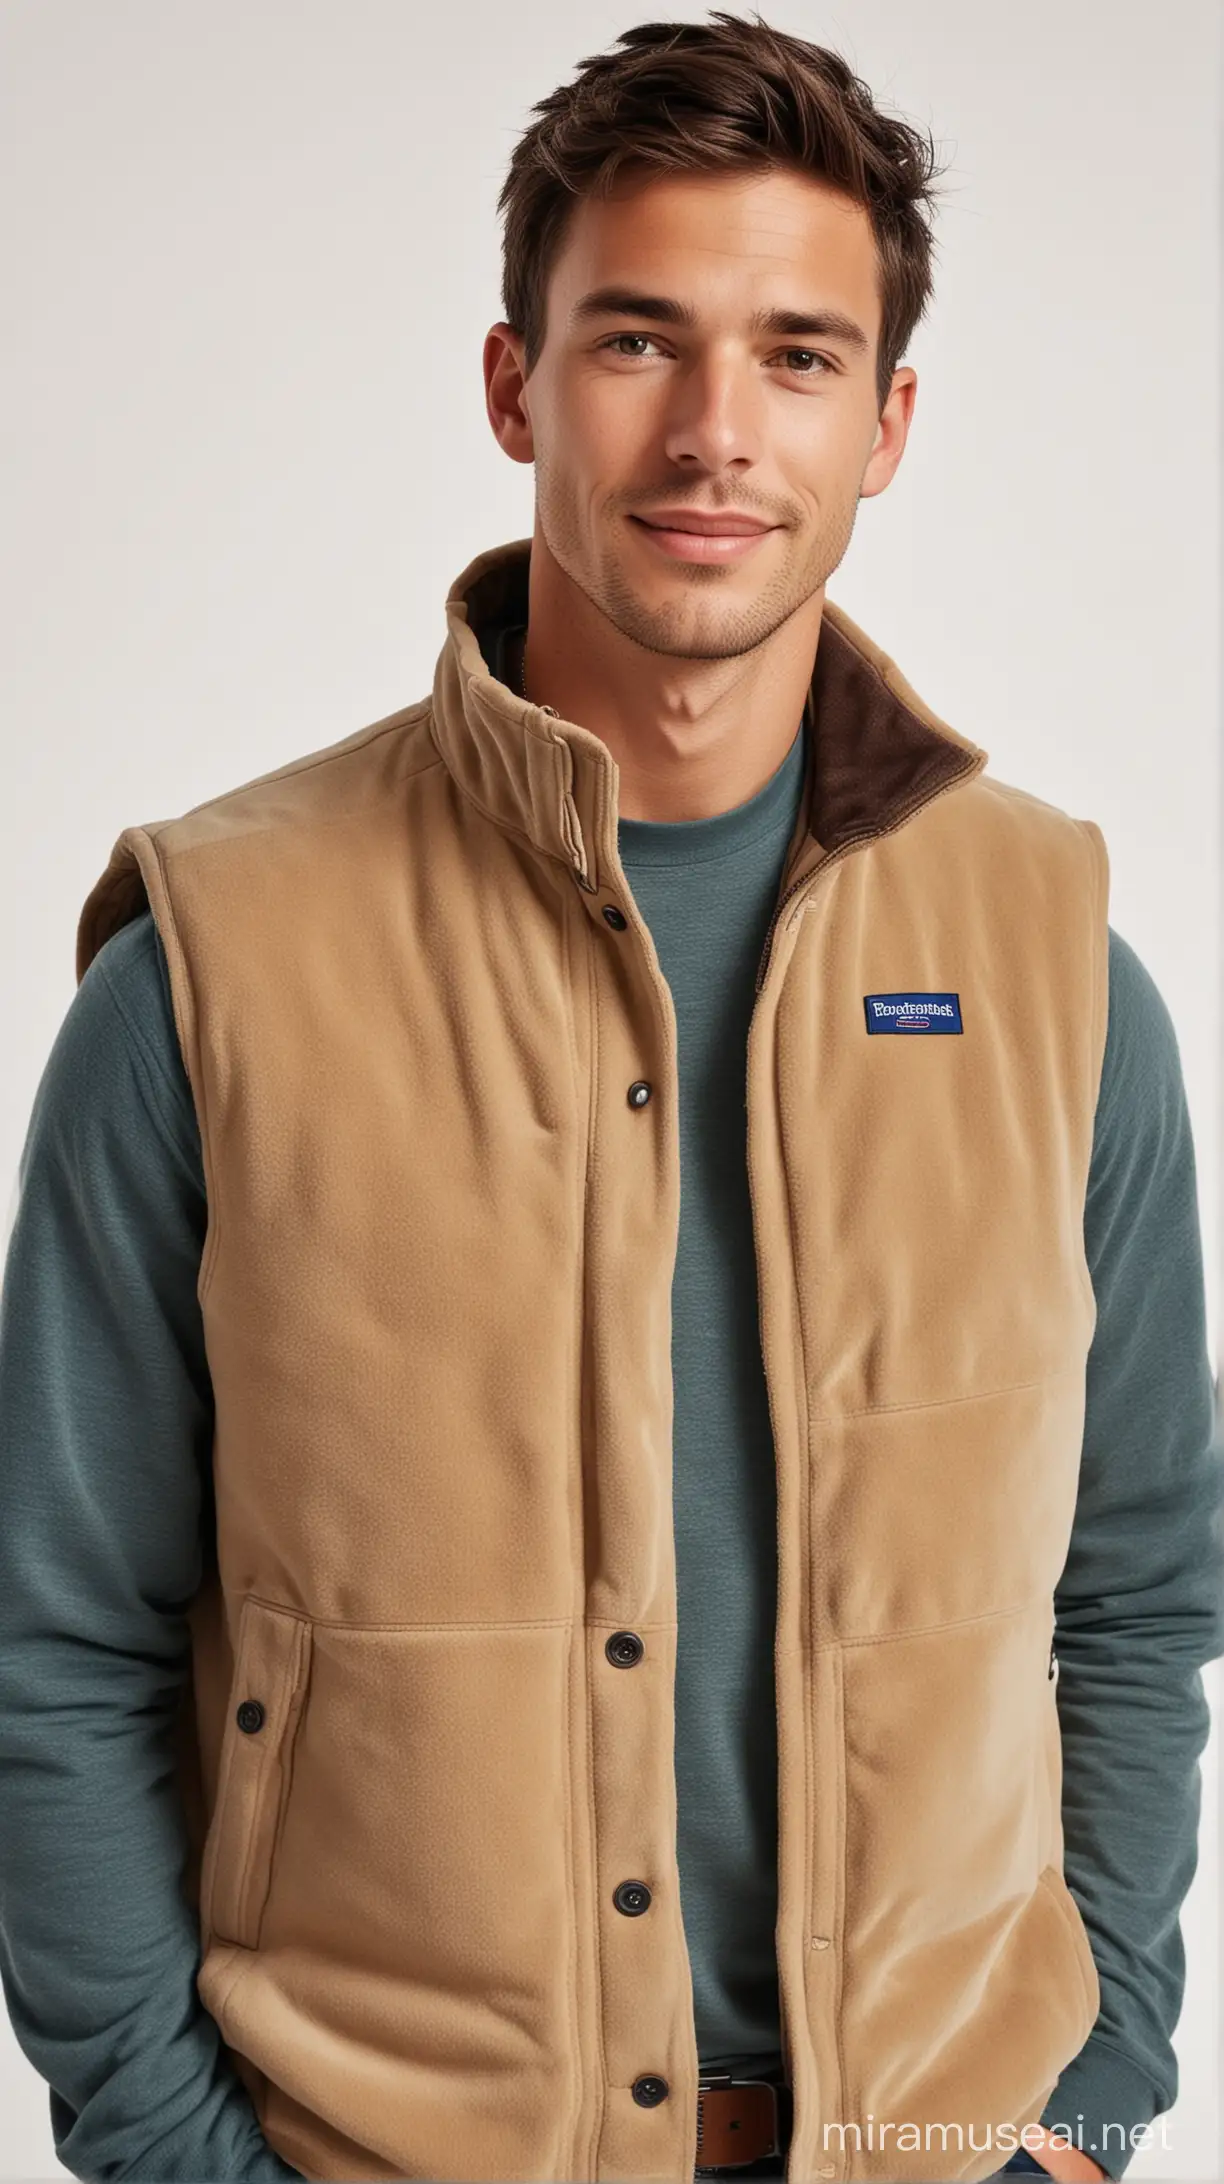 young man wearing patagonia vest white background